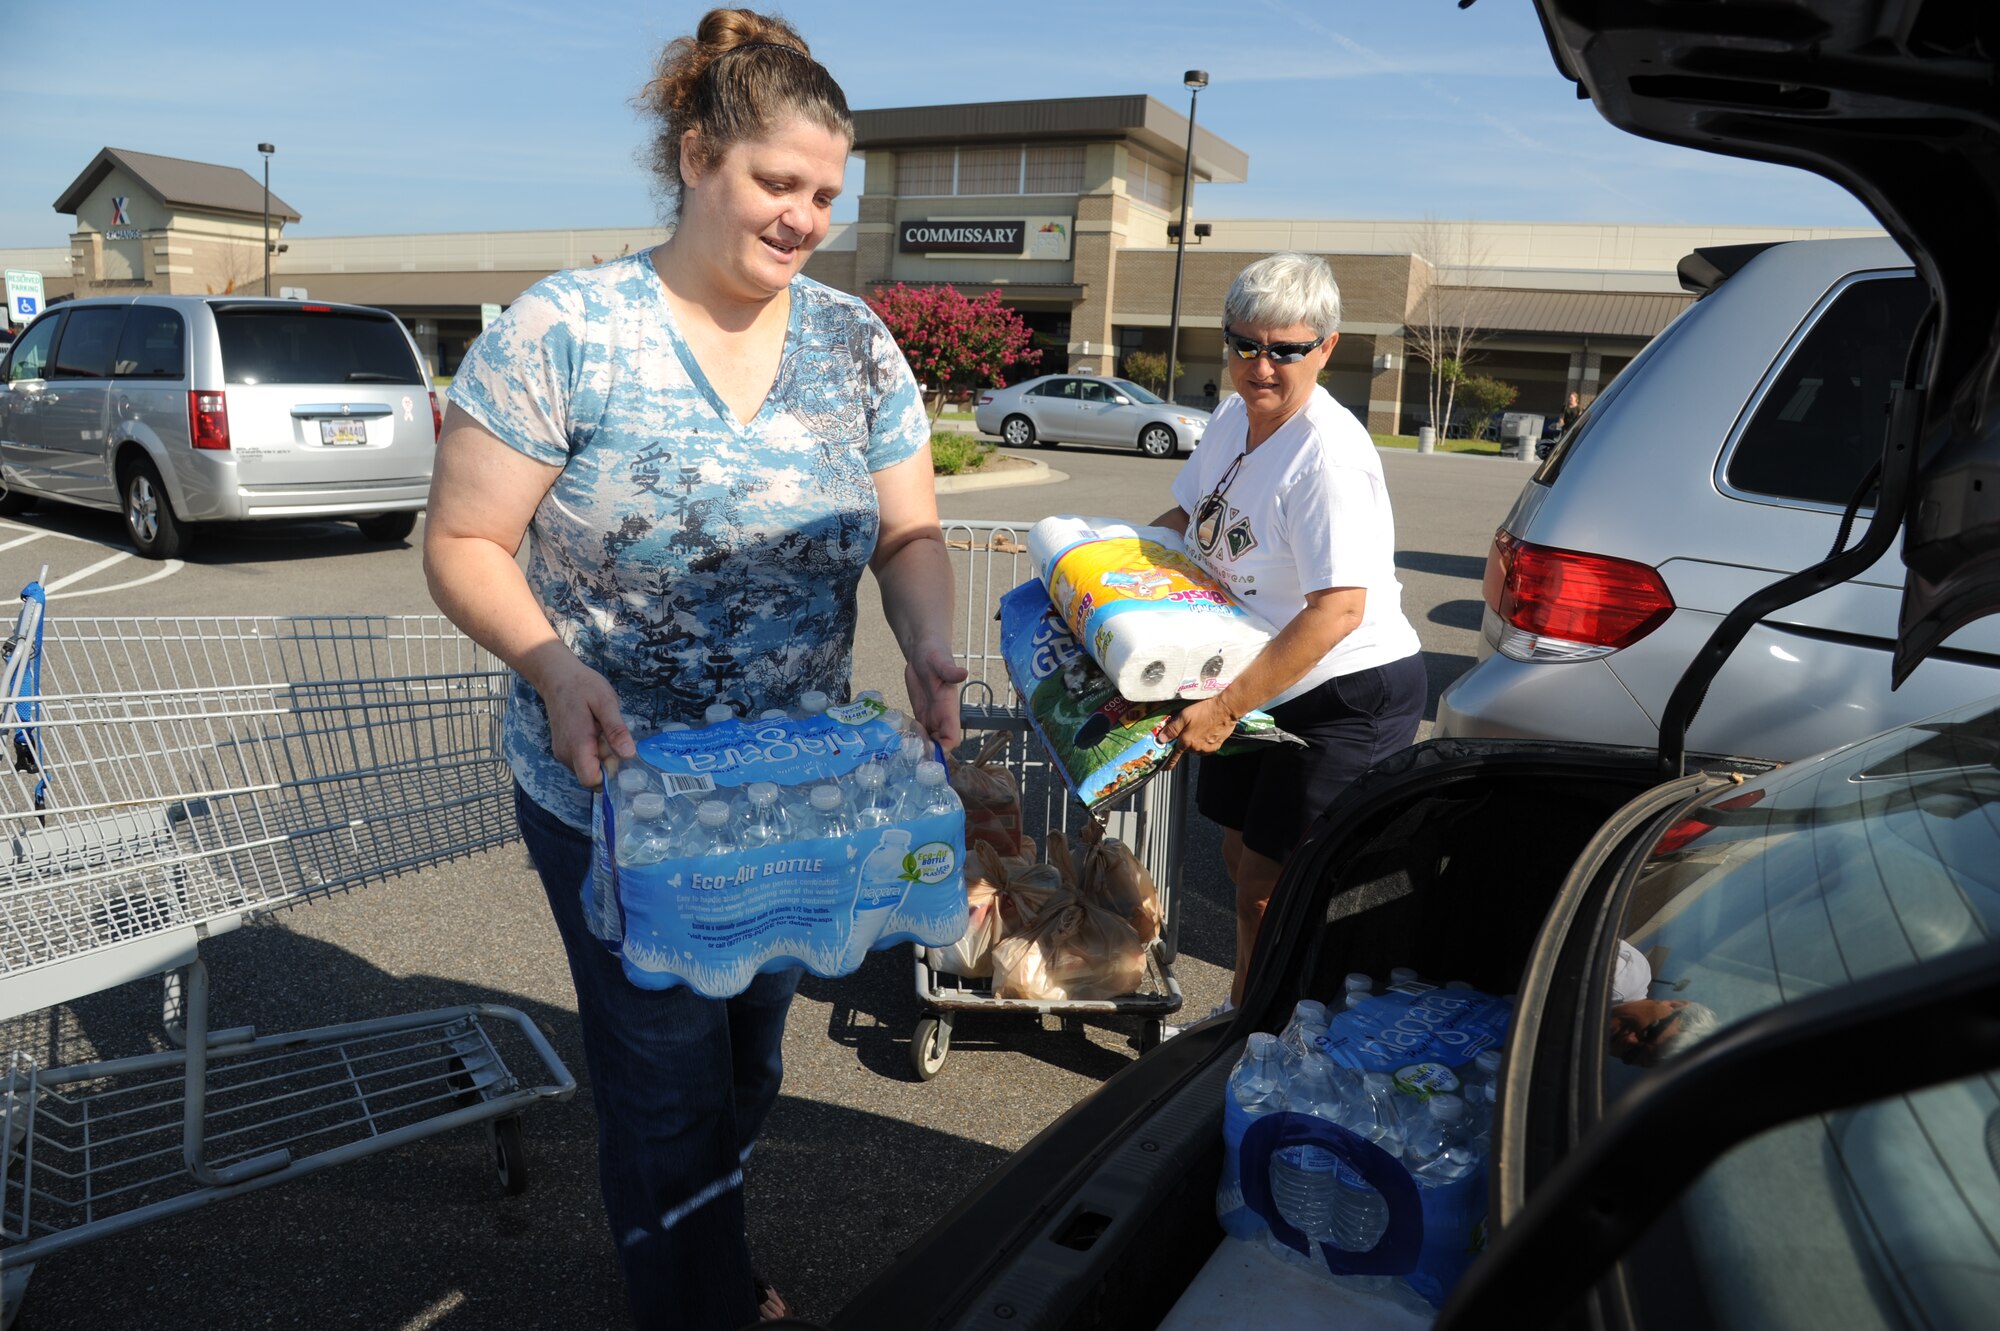 Darlene Gnuschke, Air Force retired and Biloxi resident, receives help from Maria Ainaga, head bagger at the base commissary with loading cases of water and other hurricane supplies into her trunk Aug. 27, 2012, at Keesler Air Force Base, Miss.  Keesler personnel are taking preventative measures to prepare and protect themselves and Keesler's assets as the base commander has declared HURCON 3, meaning destructive winds of 58 MPH or greater are expected as Hurricane Isaac approaches. (U.S. Air Force photo by Kemberly Groue)